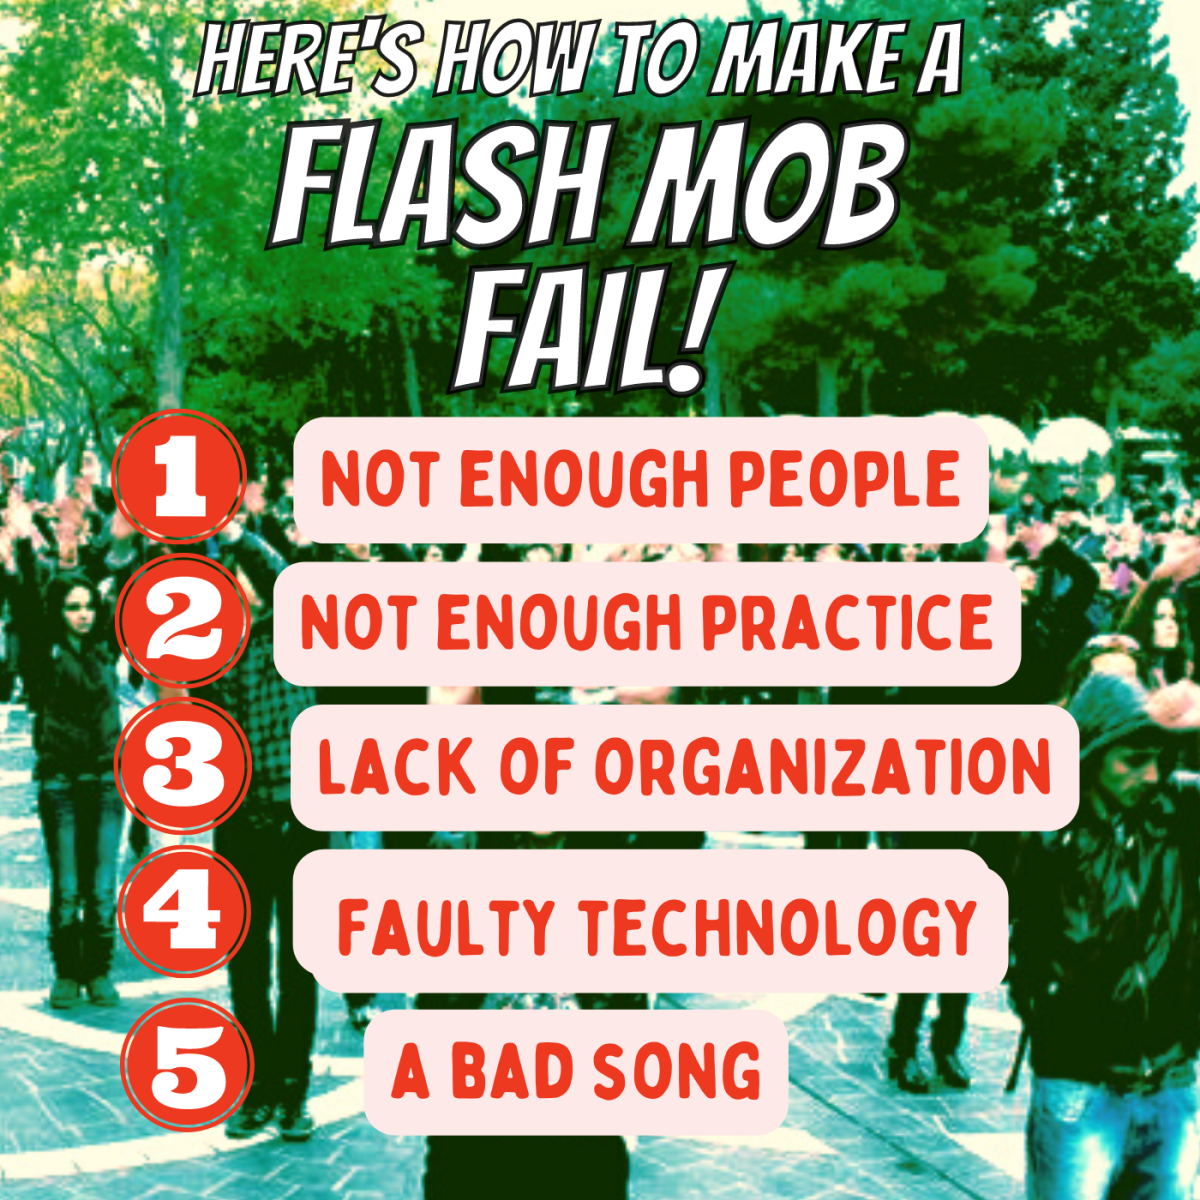 Avoiding these mistakes will make your flash mob event go from "fail" to "flawless"!